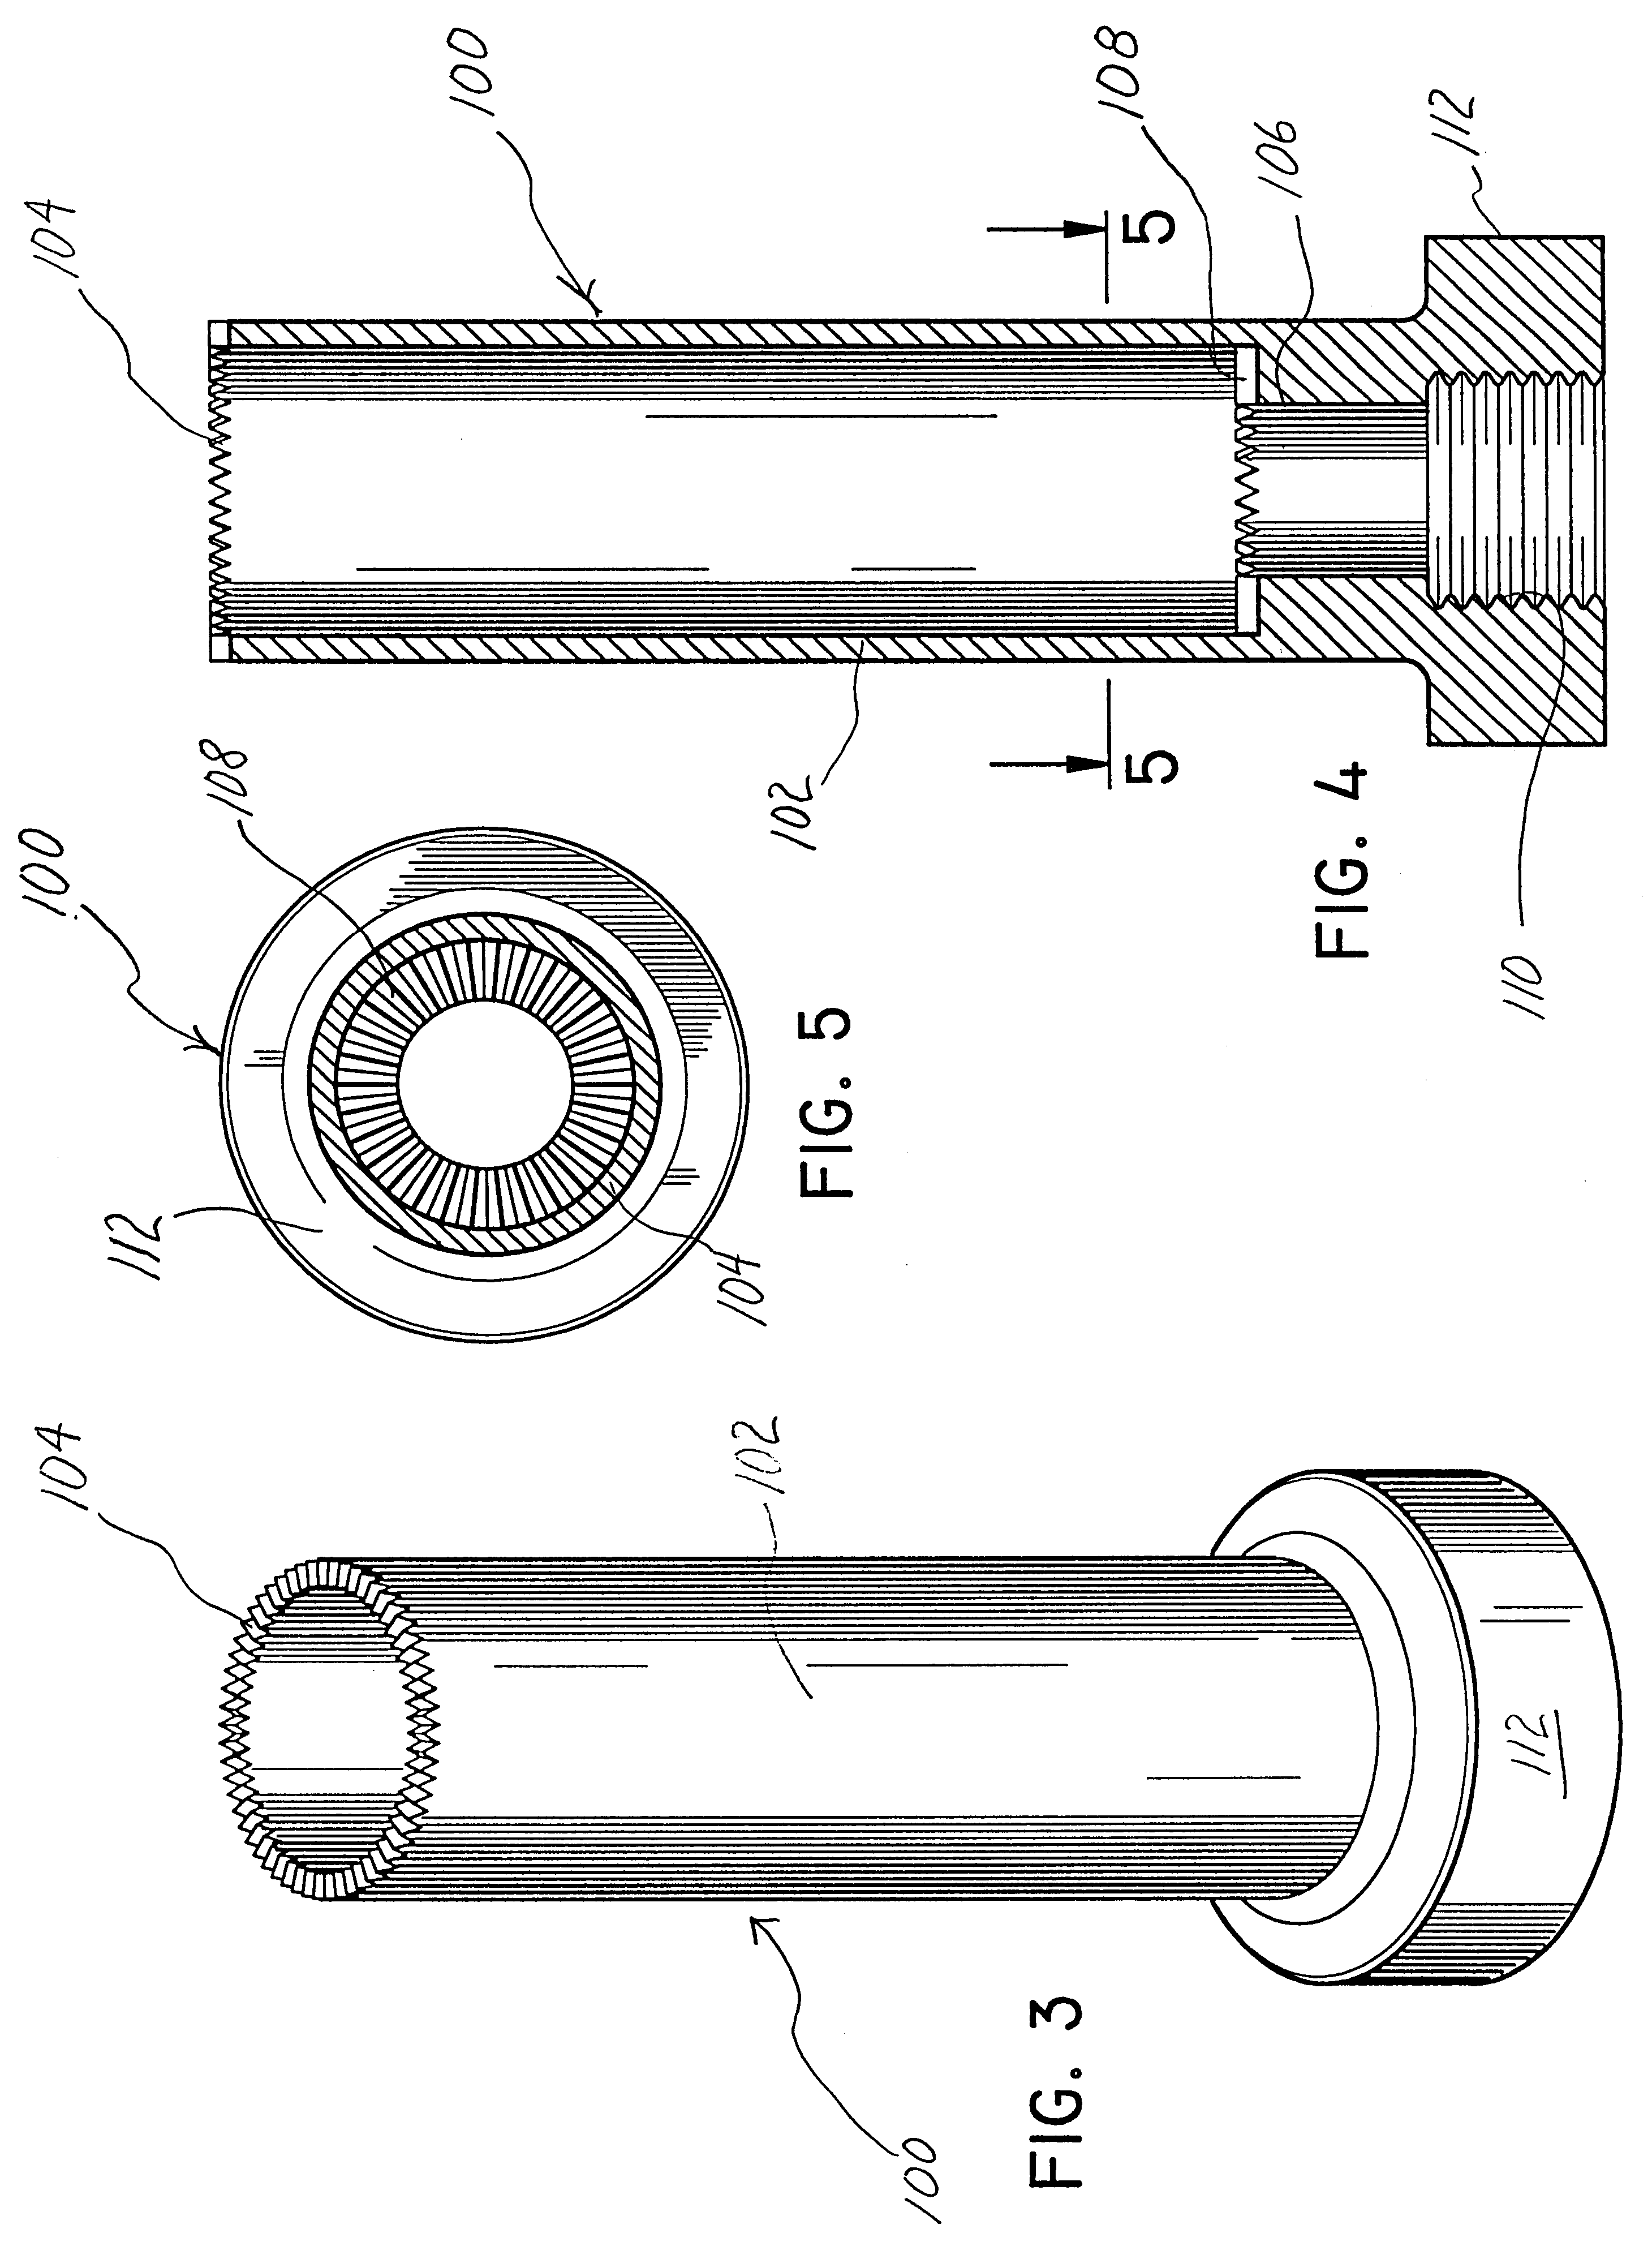 Fusion implant device and method of use